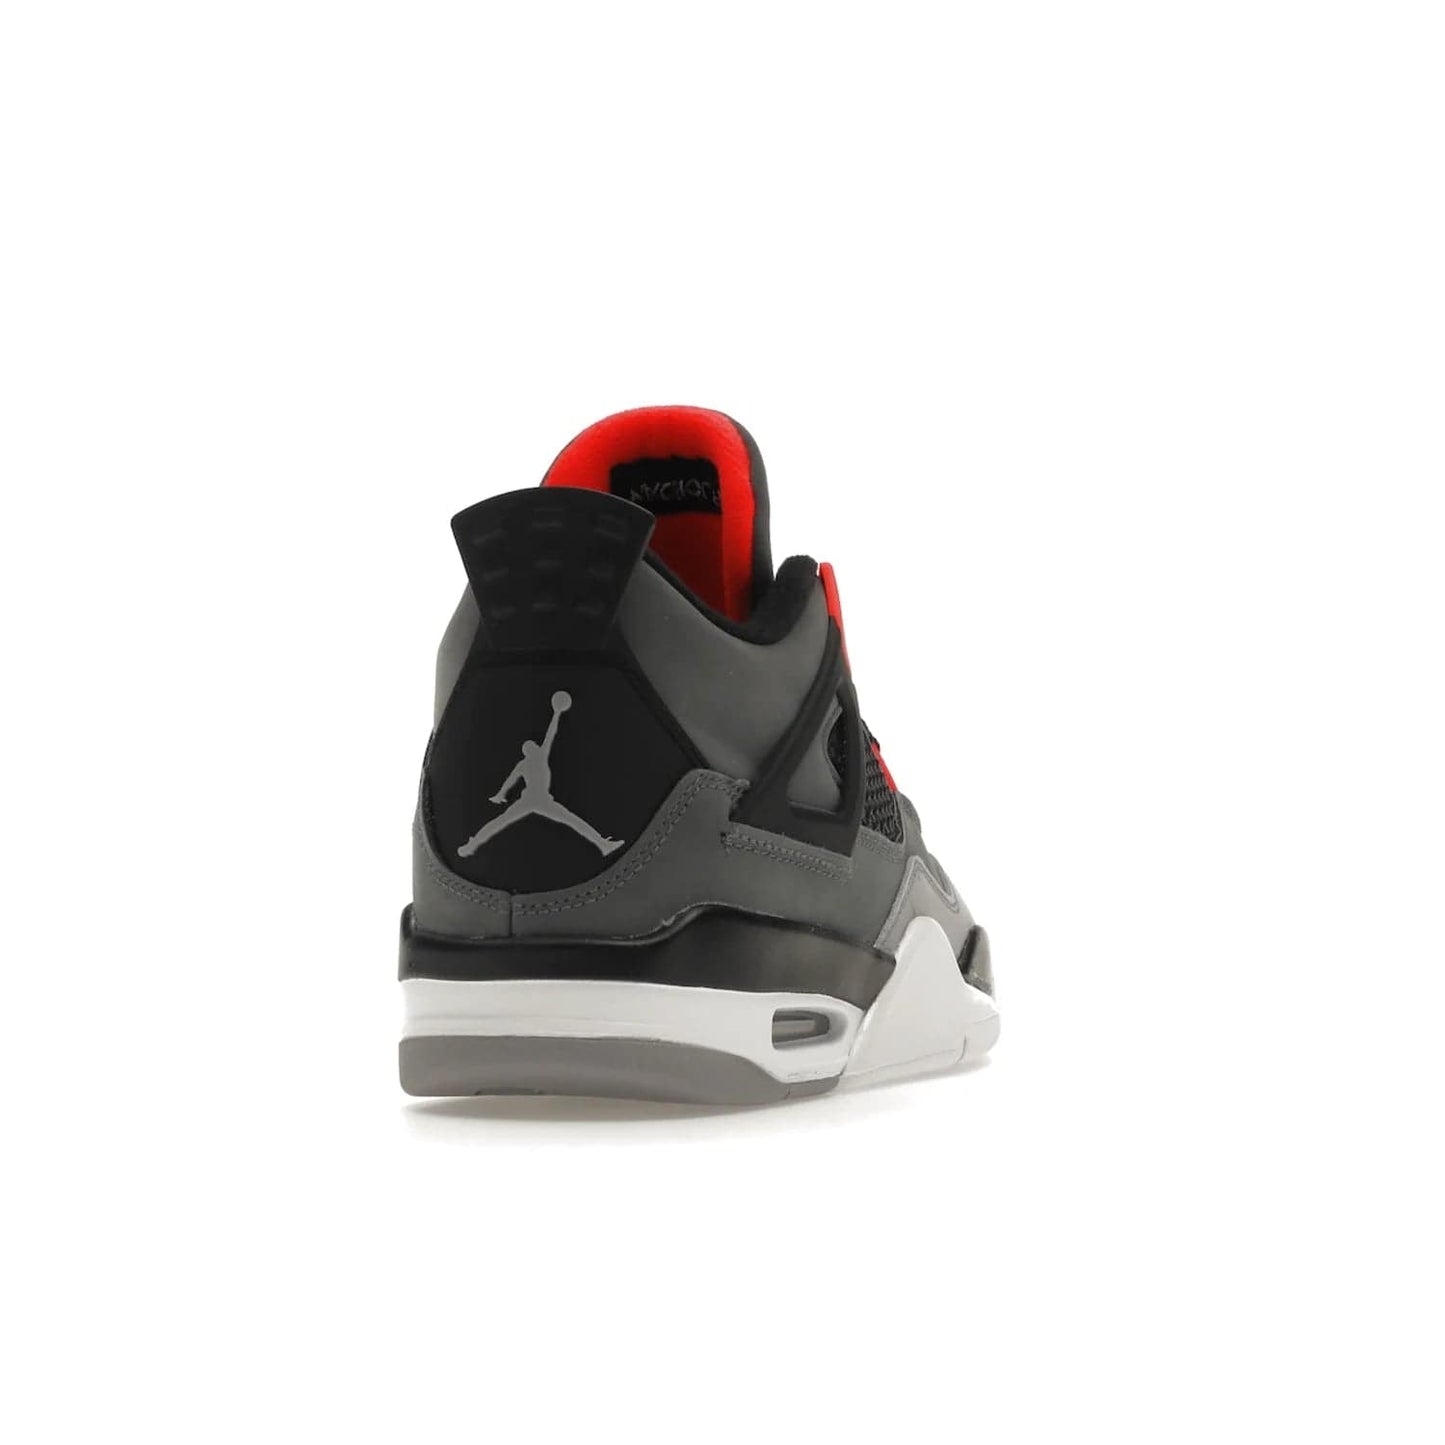 Jordan 4 Retro Infrared (GS) - Image 30 - Only at www.BallersClubKickz.com - Shop the Air Jordan 4 Retro Infrared (GS) for a classic silhouette with subtle yet bold features. Dark grey nubuck upper with lighter forefoot overlay, black accents, Infrared molded eyelets & woven tongue tag. Available June 2022.